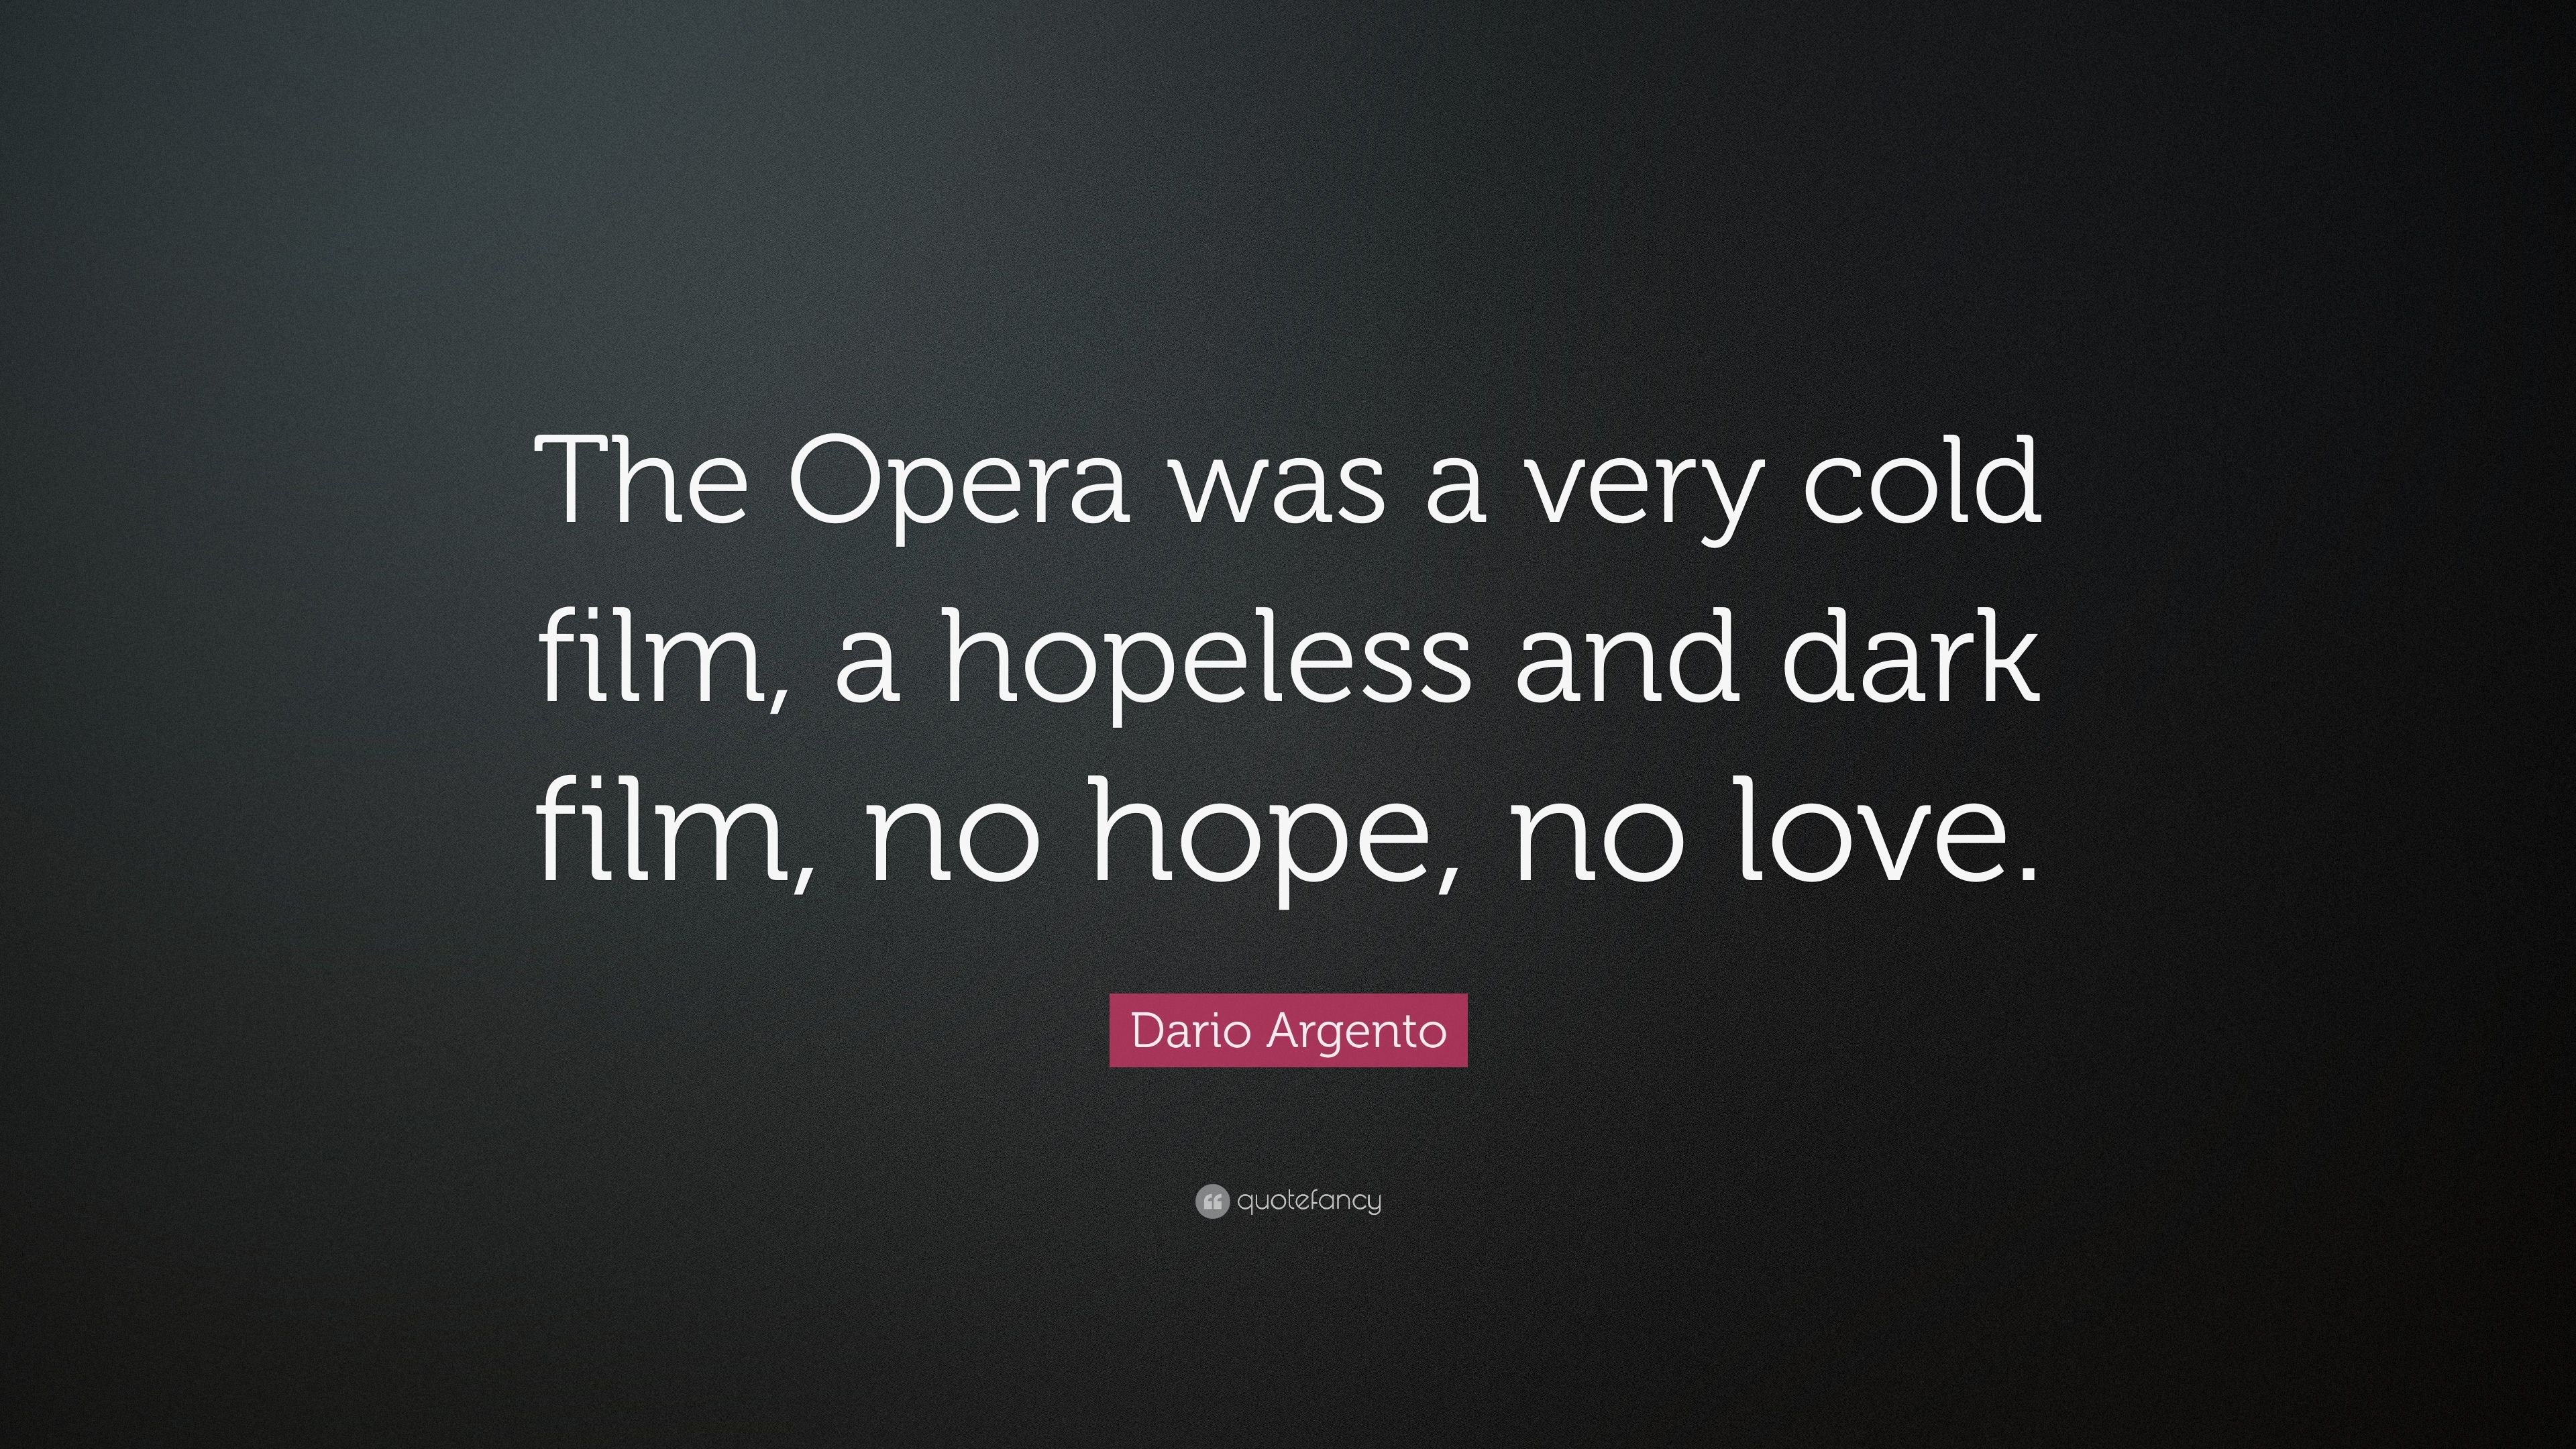 Dario Argento Quote: “The Opera was a very cold film, a hopeless